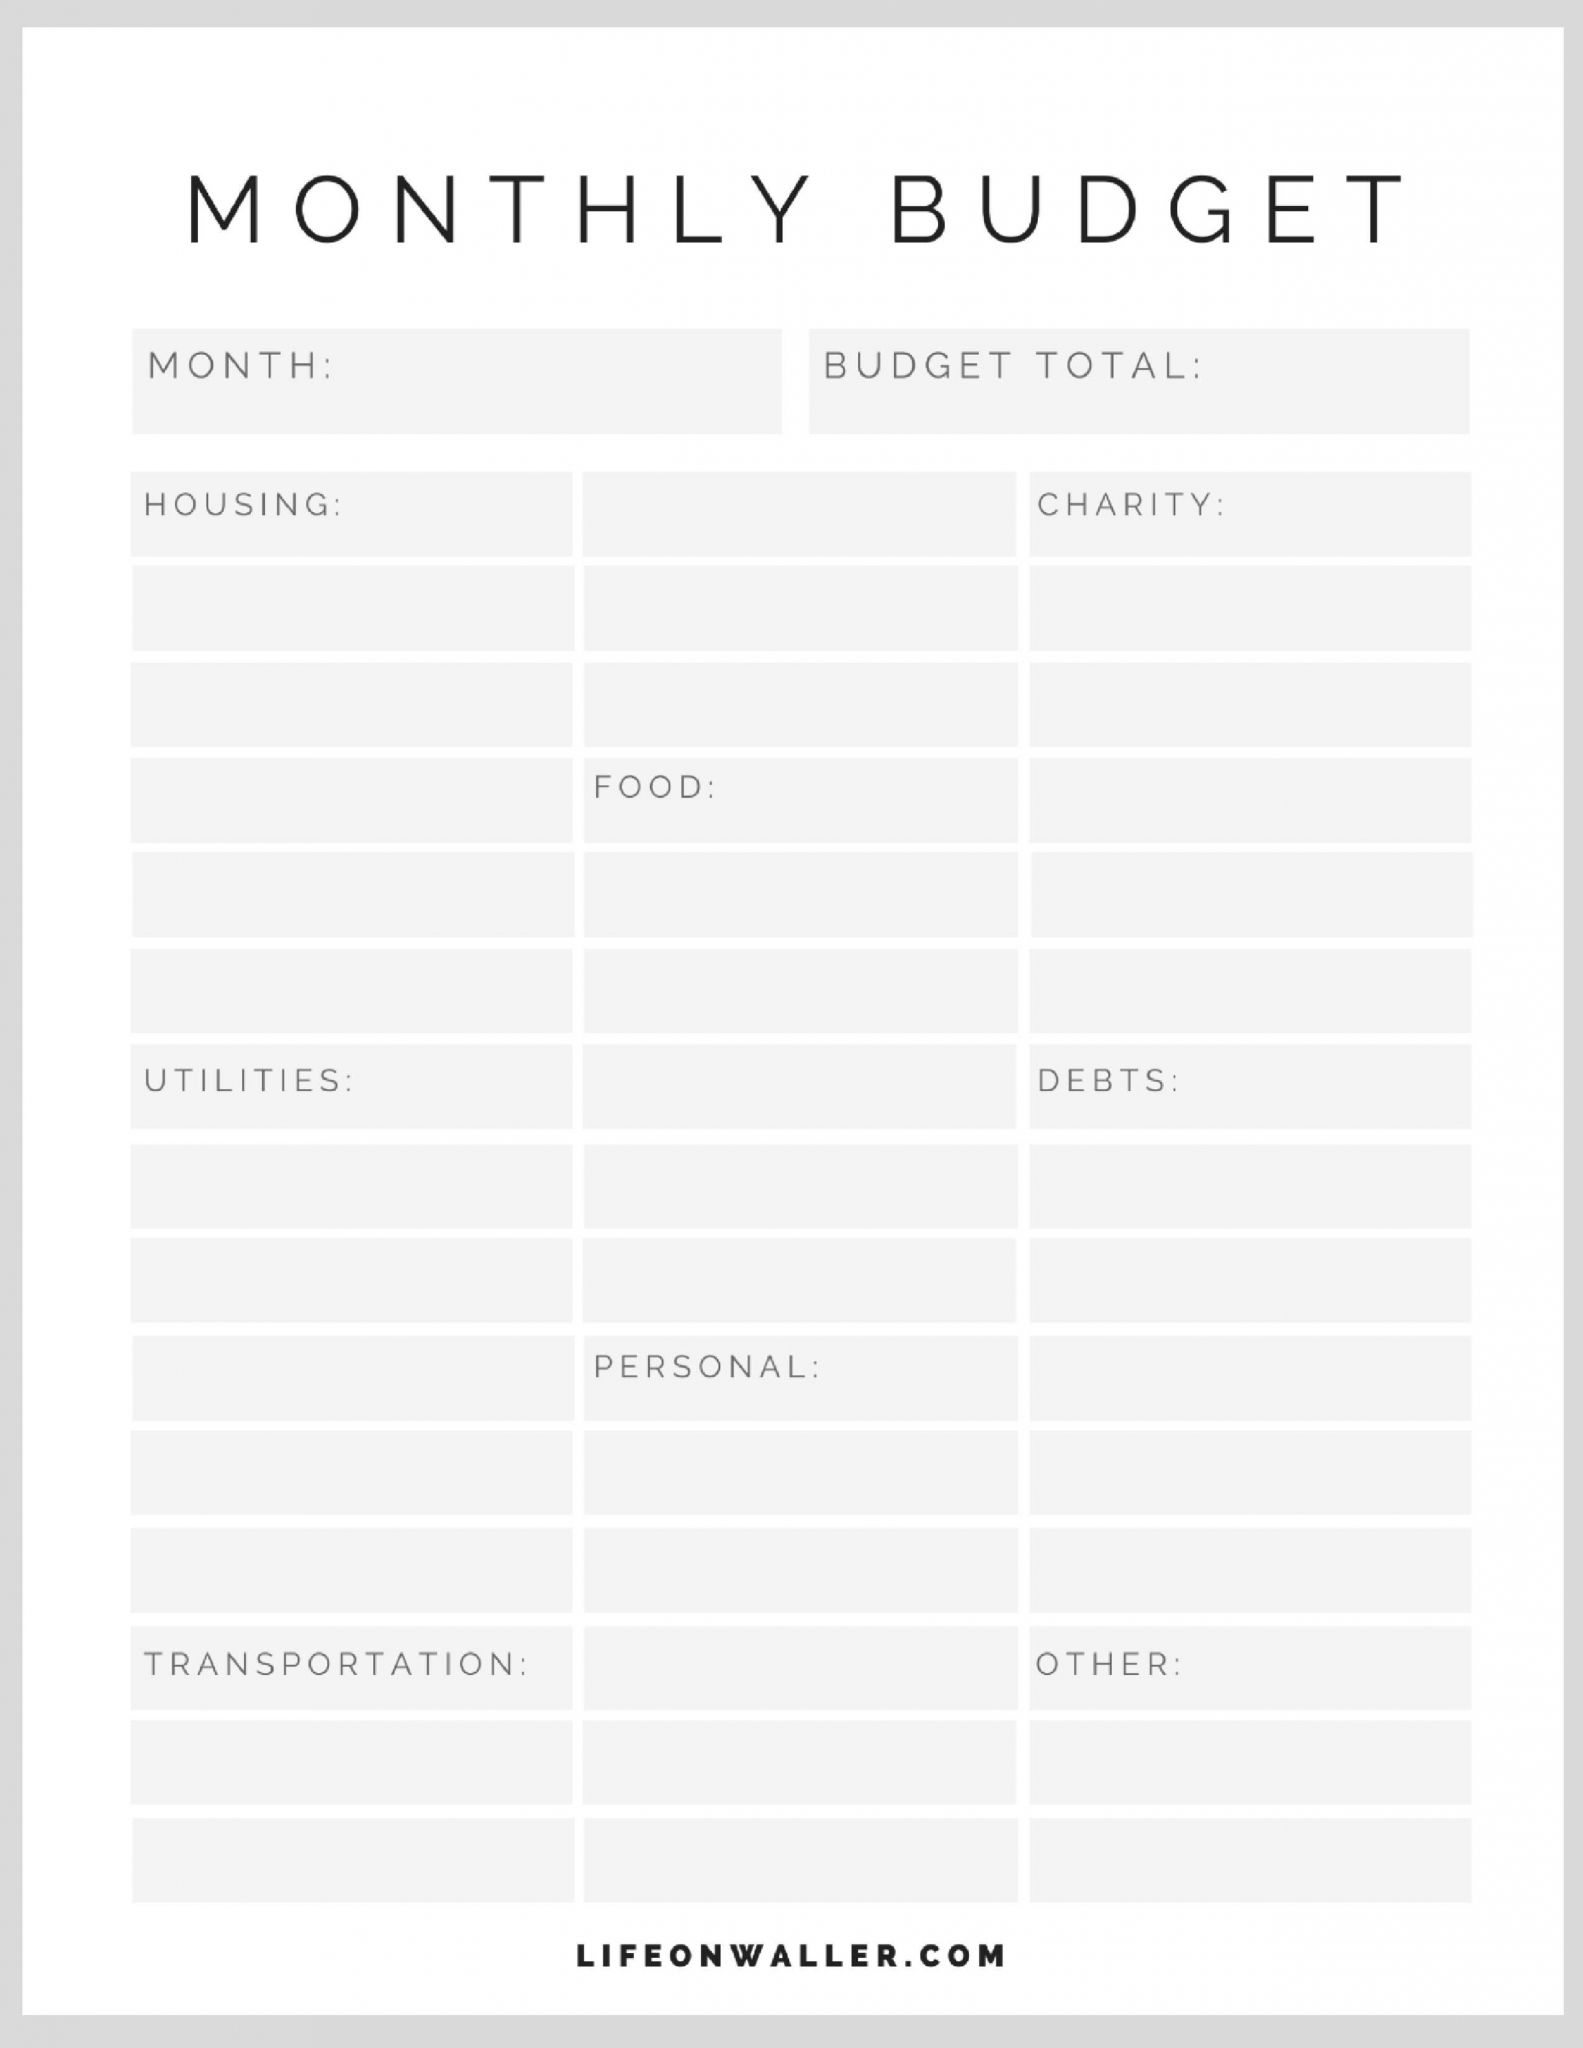 Monthly Budget Worksheet Pdf together with Simple Monthly Bud Worksheet Lovely Free Printable Bud forms